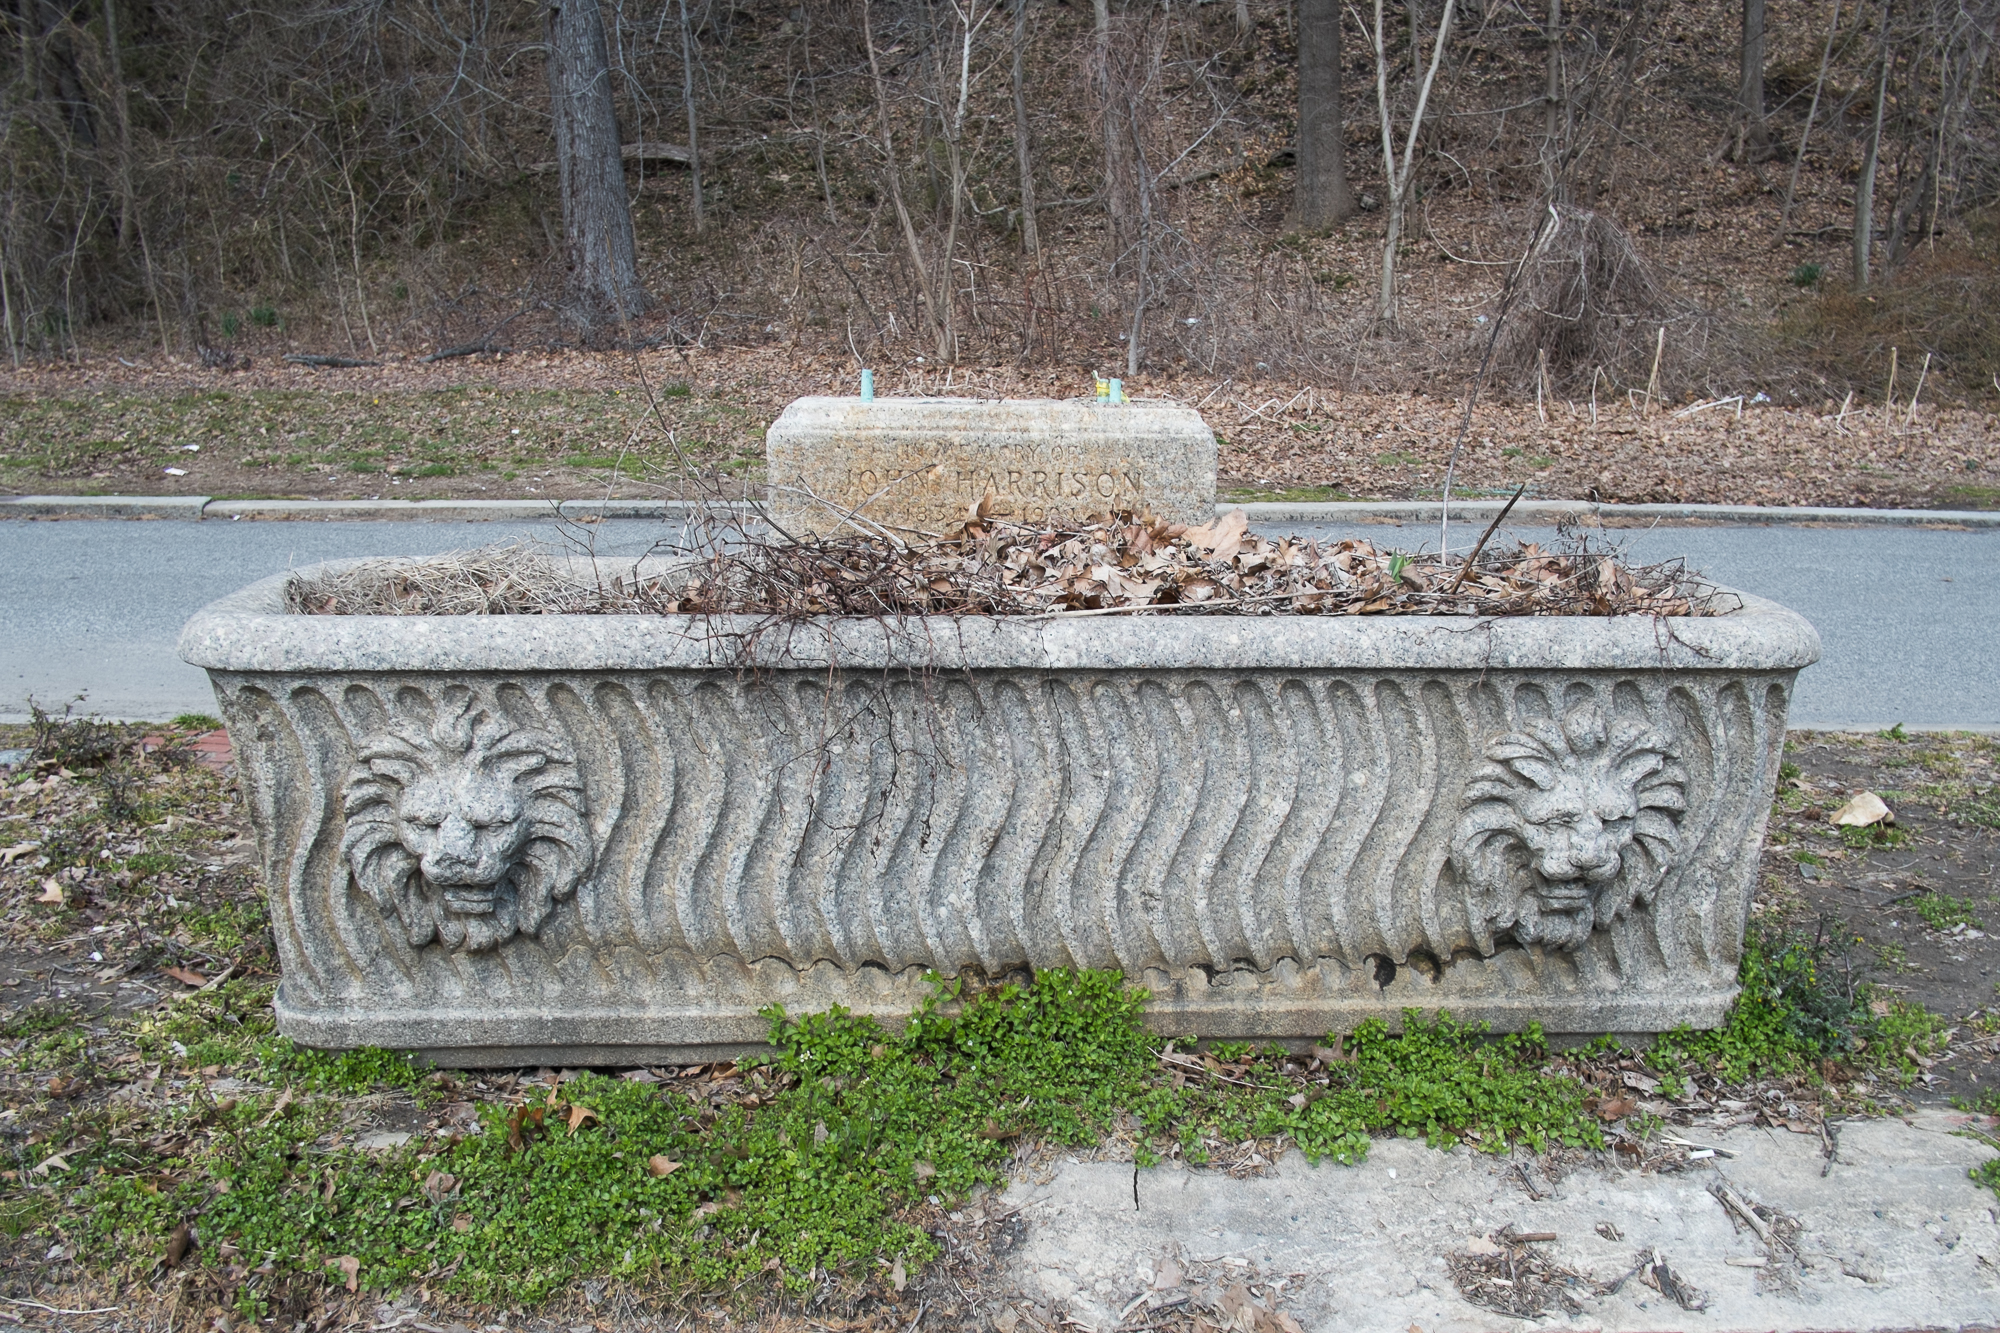 This silted up trough with the lion's head motif was donated to the memory of John Harrison, sits along Kelly Drive near Fountain Green.